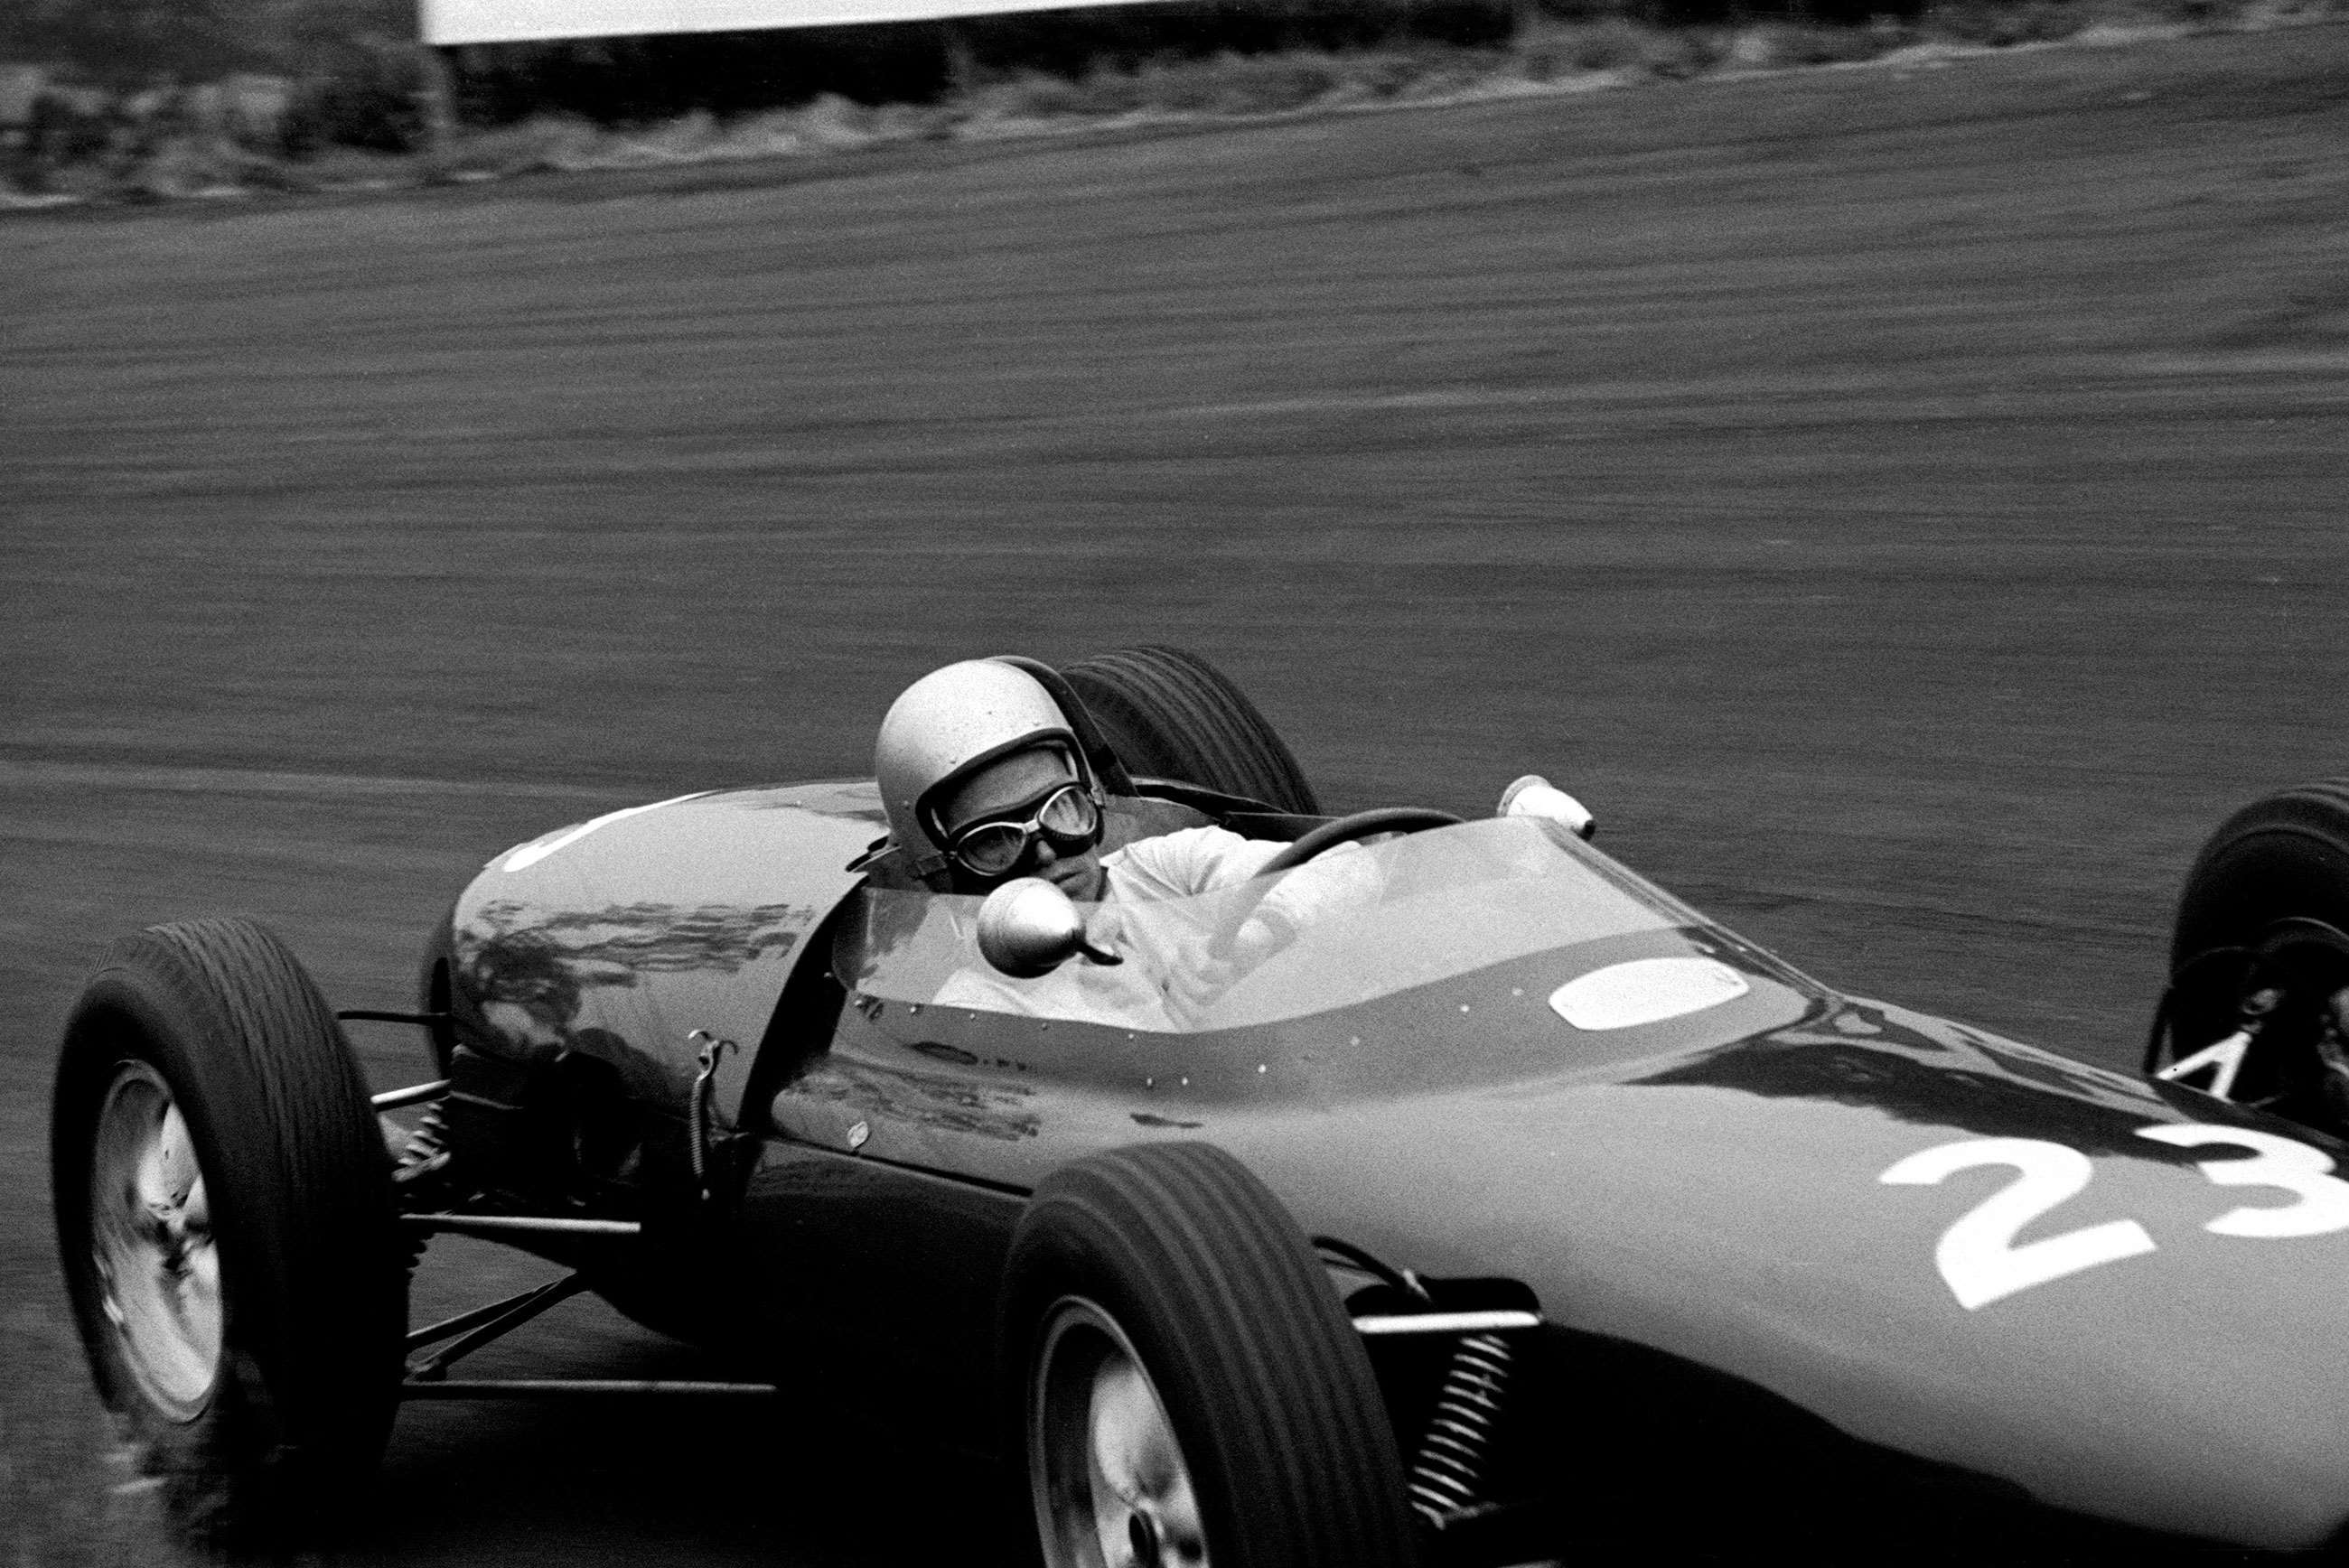 best-drivers-never-to-race-in-f1-5-gary-hocking-1962-non-championship-f1-rob-walker-lotus-18_21-david-phipps-mi-goodwood-26052020.jpg